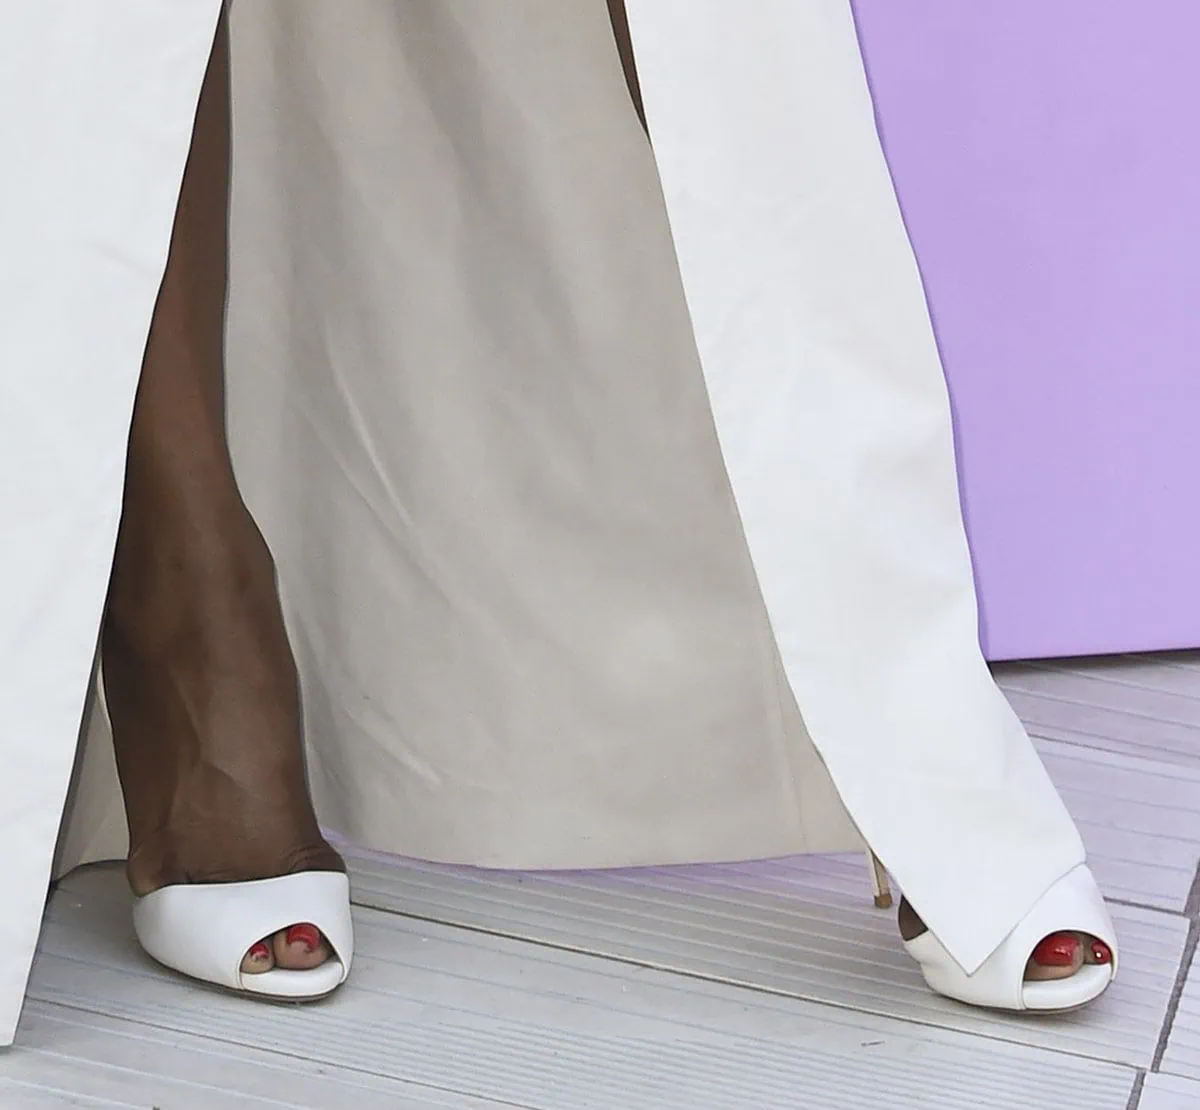 Naomi Campbell completes her monochromatic white ensemble with white peep-toe pumps that look too small for her size 9 feet